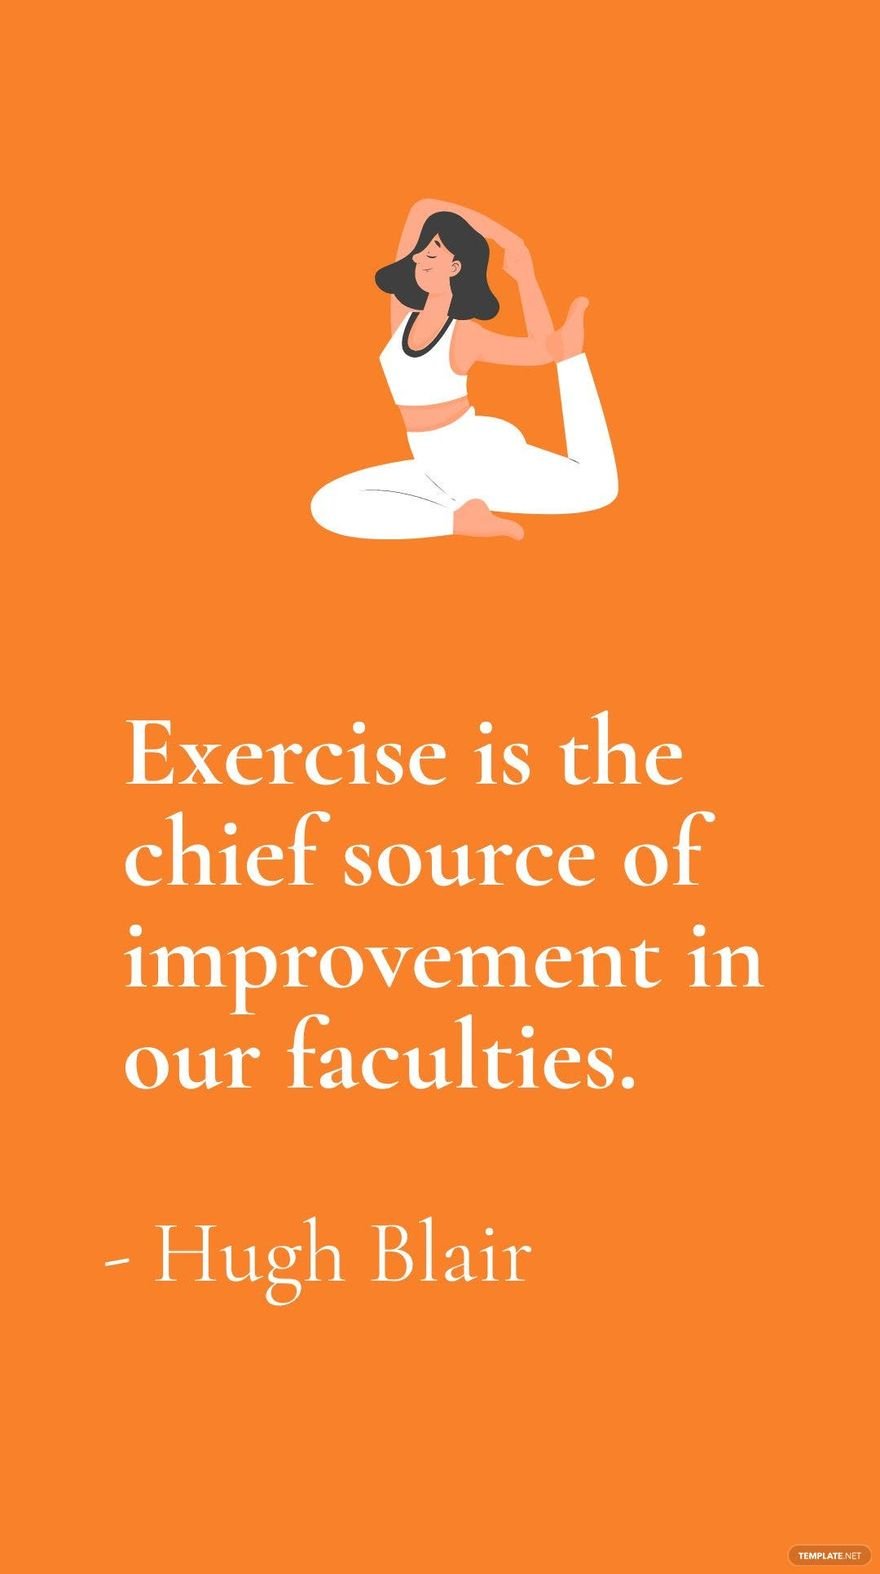 Hugh Blair - Exercise is the chief source of improvement in our faculties.